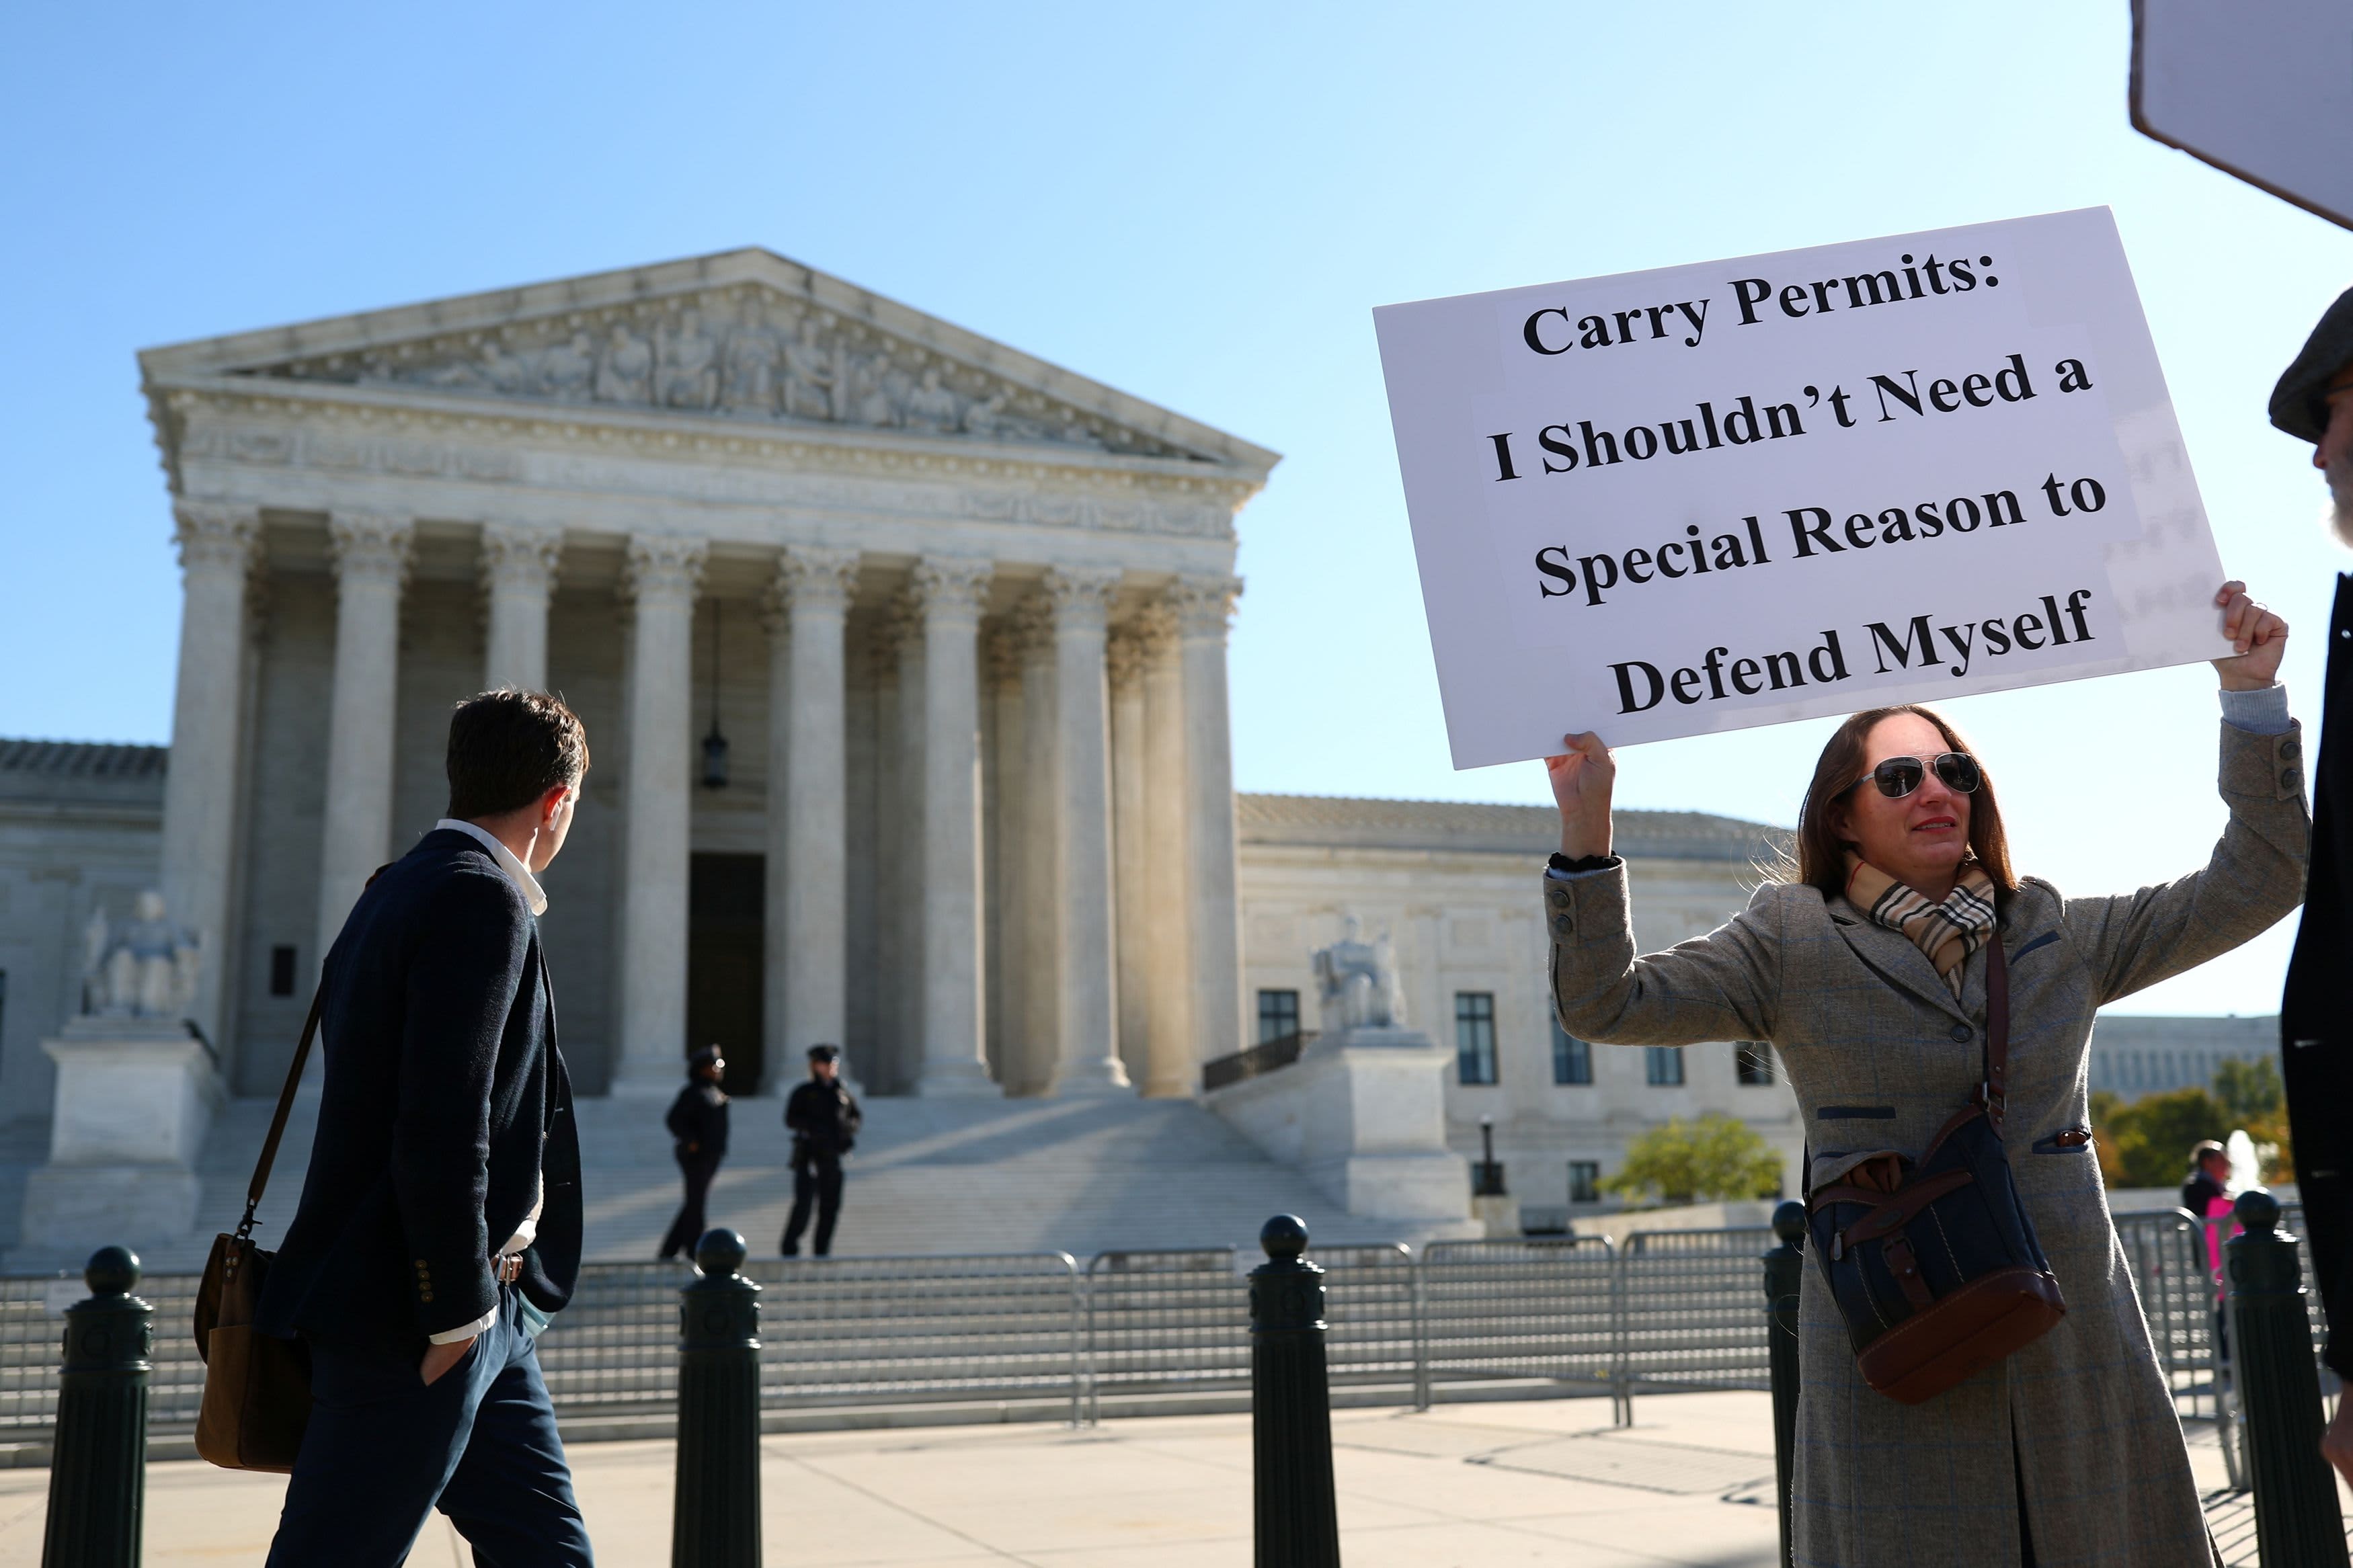 Breaking News: US Supreme Court rules 6-3 on Carry Law!